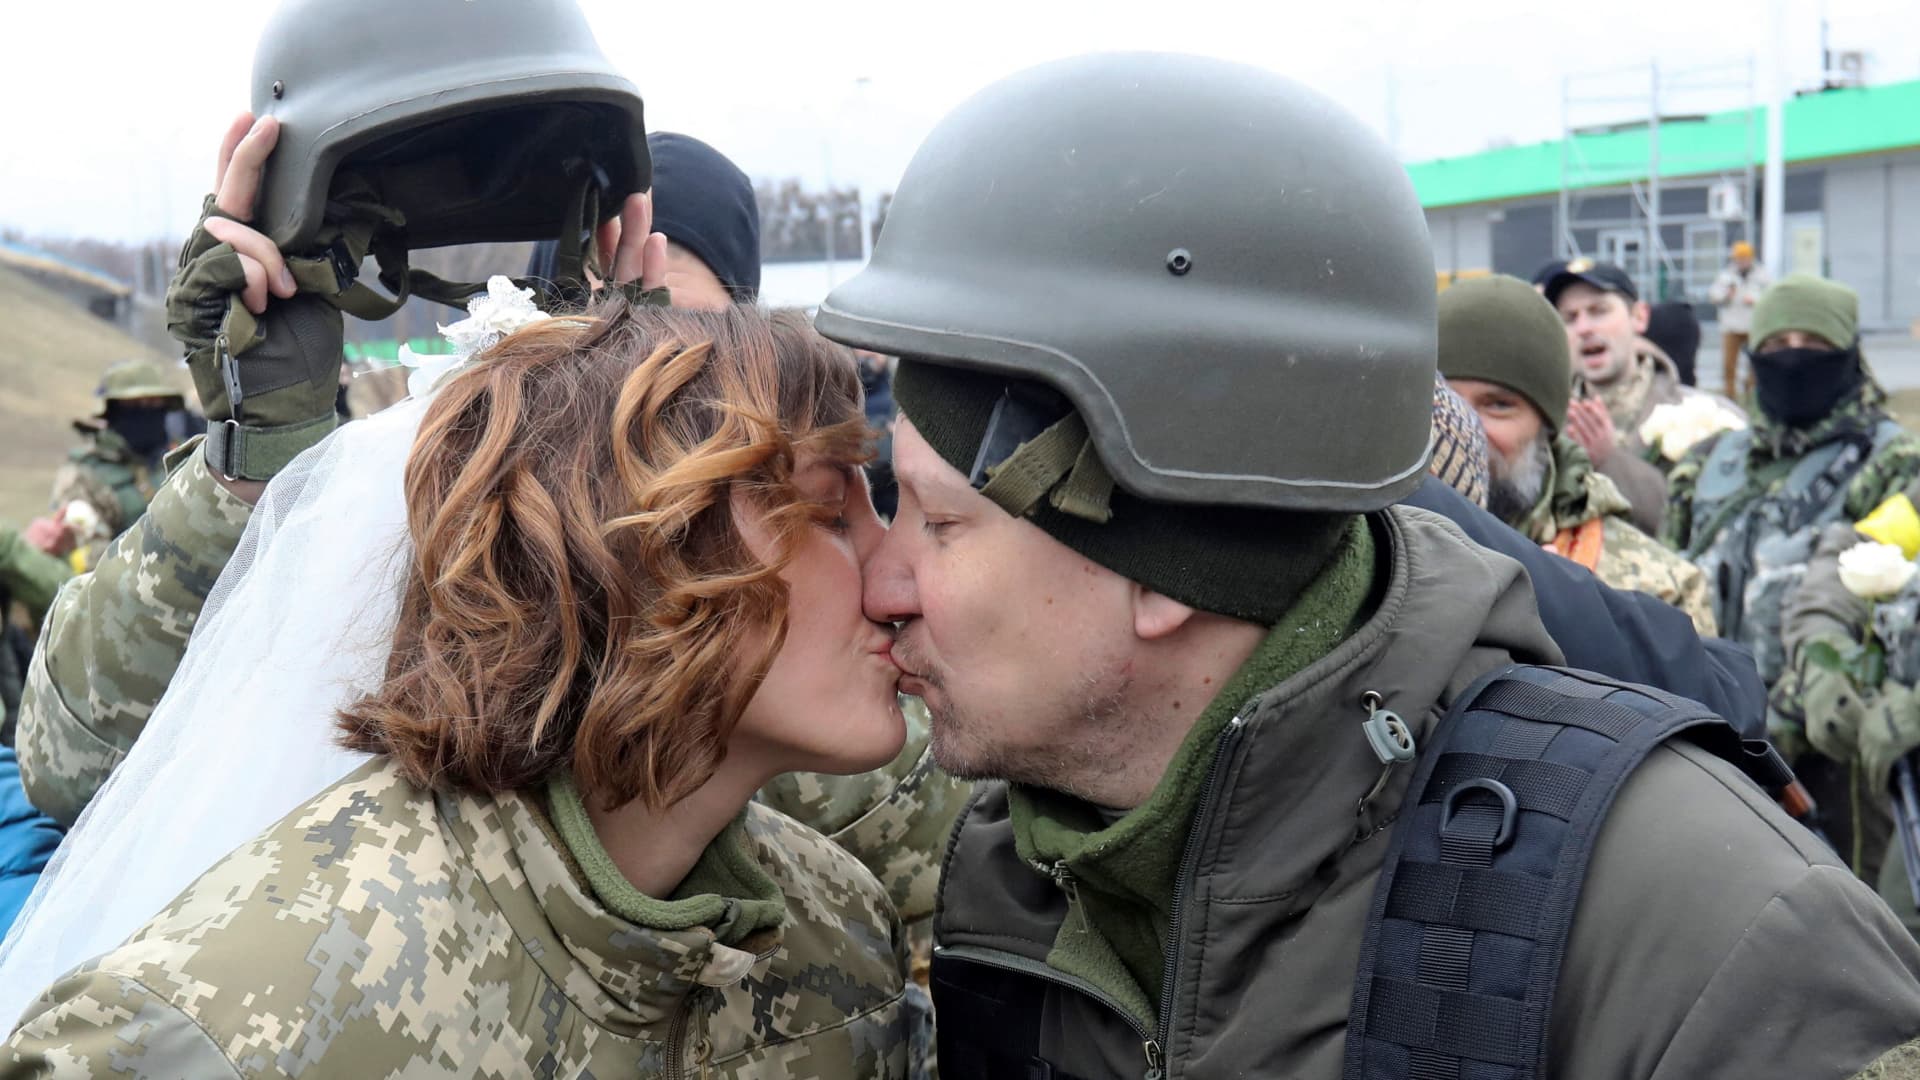 Members of the Ukrainian Territorial Defence Forces Lesia Ivashchenko and Valerii Fylymonov kiss at their wedding during Ukraine-Russia conflict, at a checkpoint in Kyiv, Ukraine March 6, 2022.